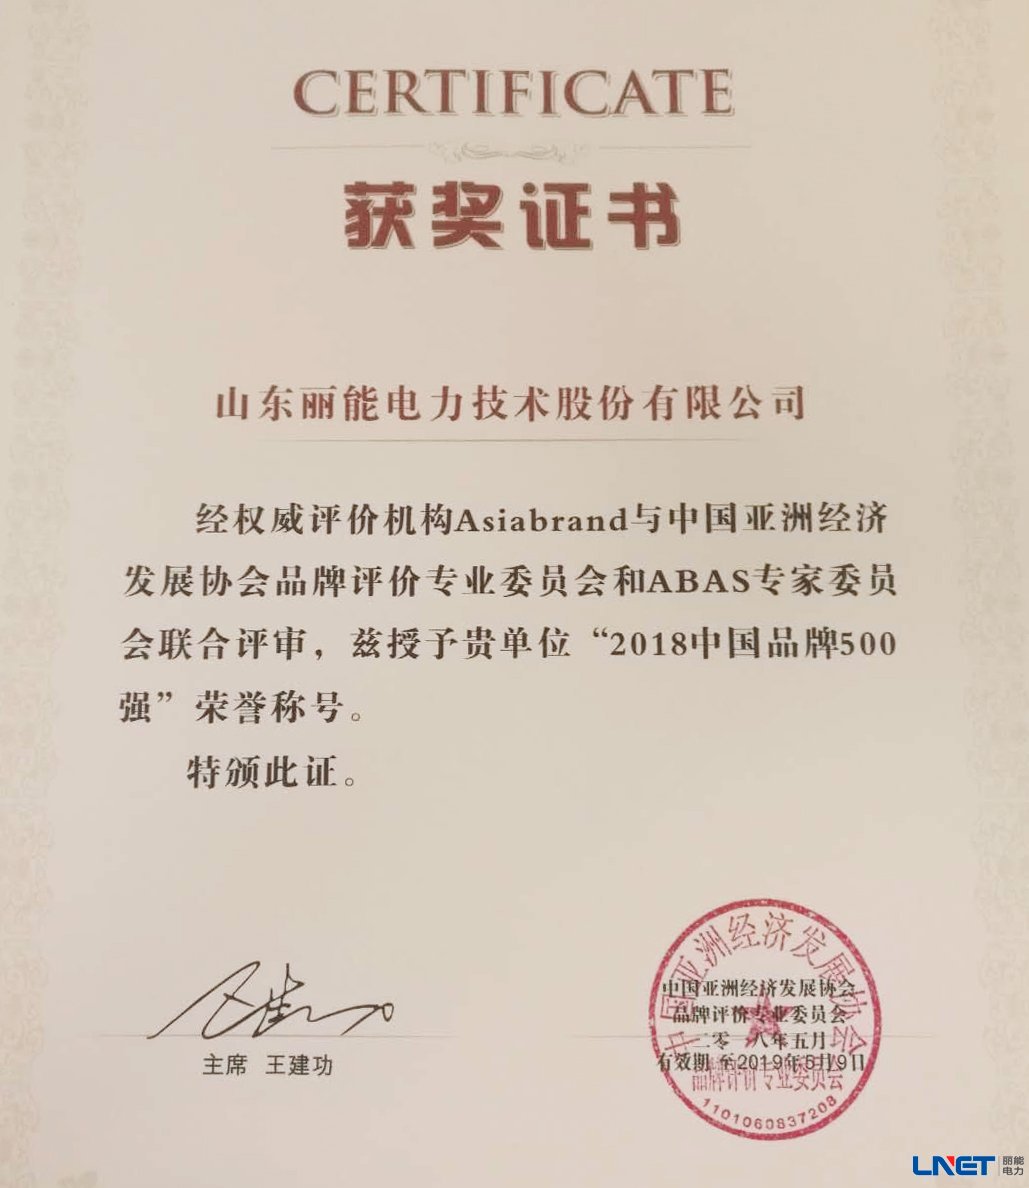 The company won the China Brand Top 500 honorary title